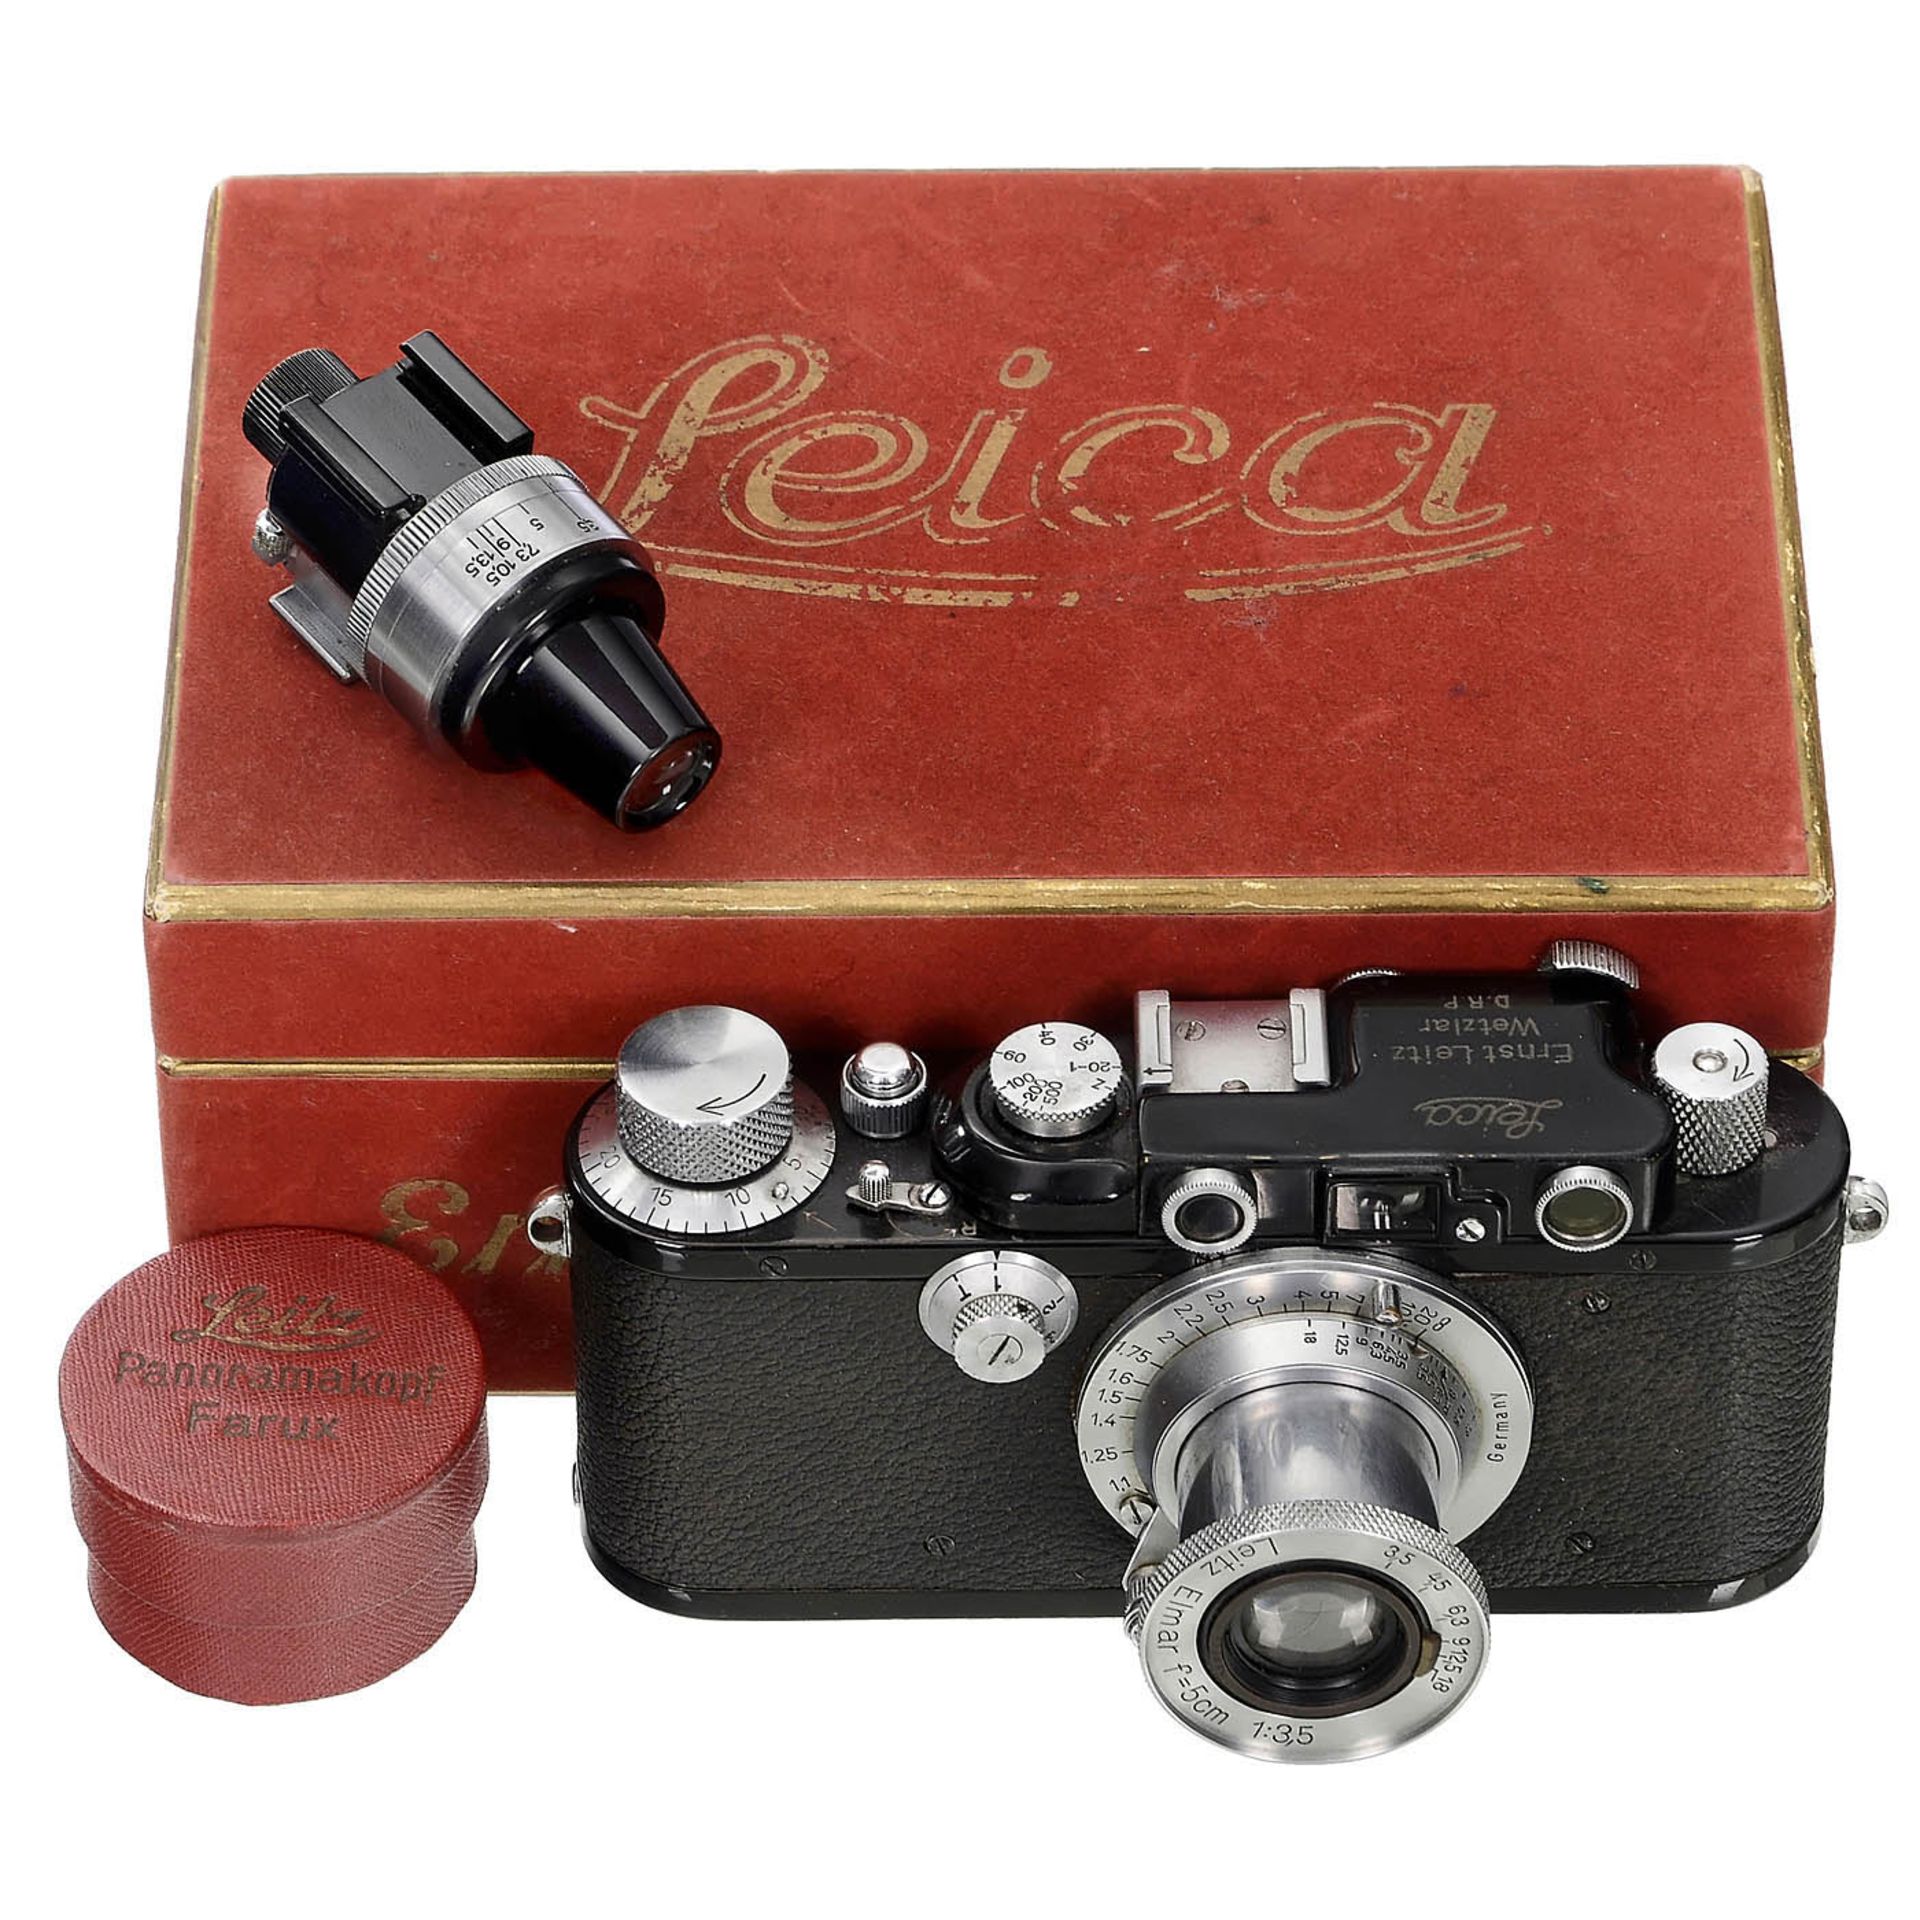 Leica III Camera with VIDOM, Brochure Collection and 2 Red Boxes, 1933-39 - Image 2 of 4